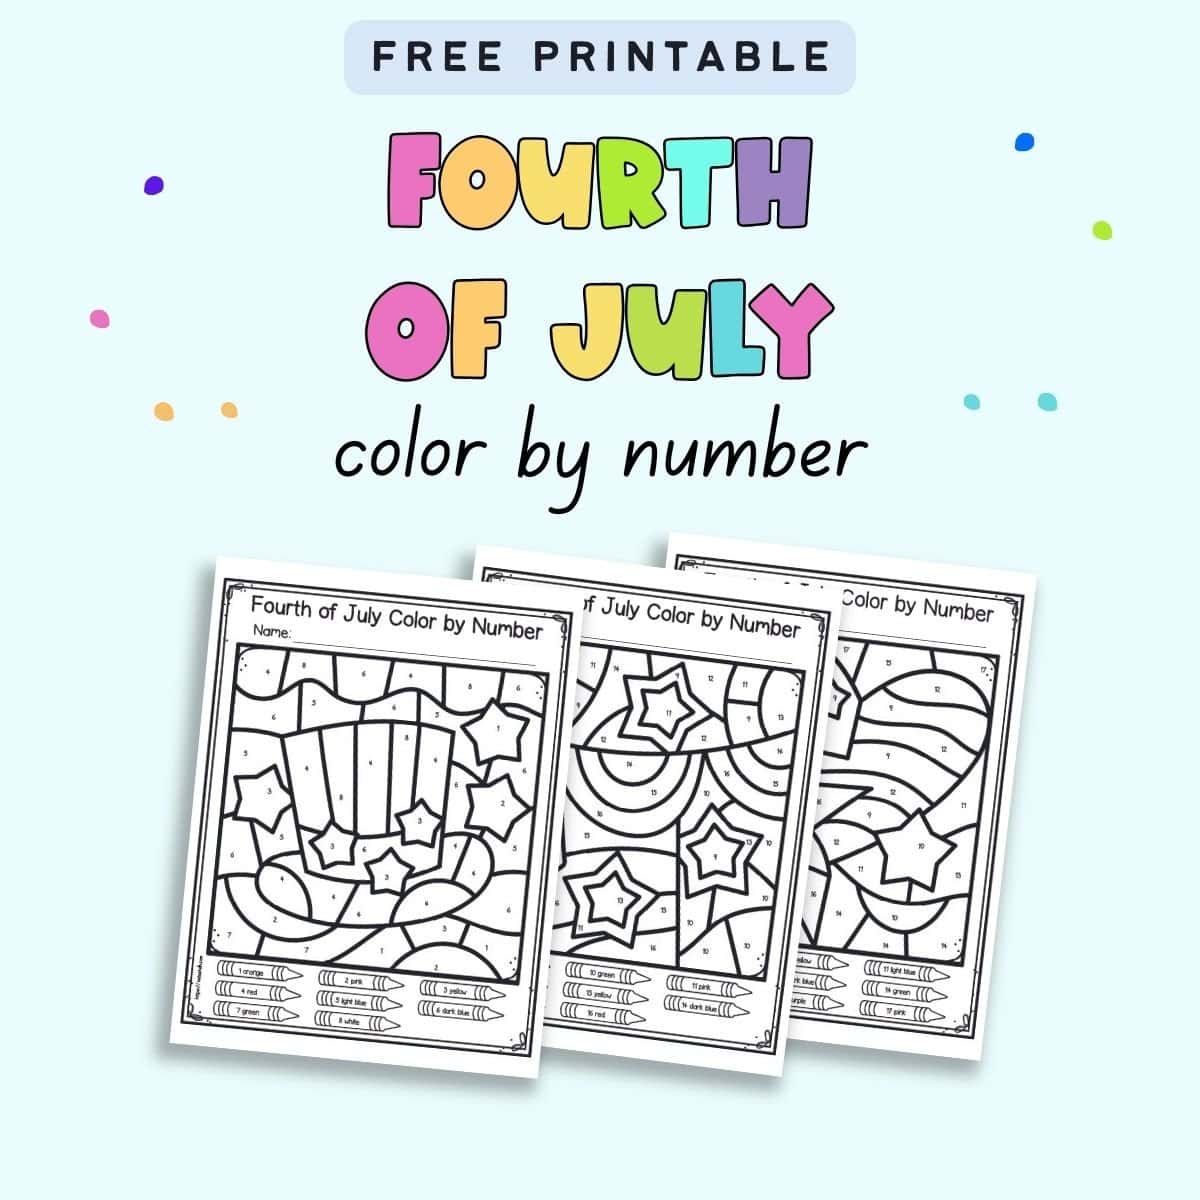 Text "free printable Fourth of July color by number" with a preview of three color by number pages.